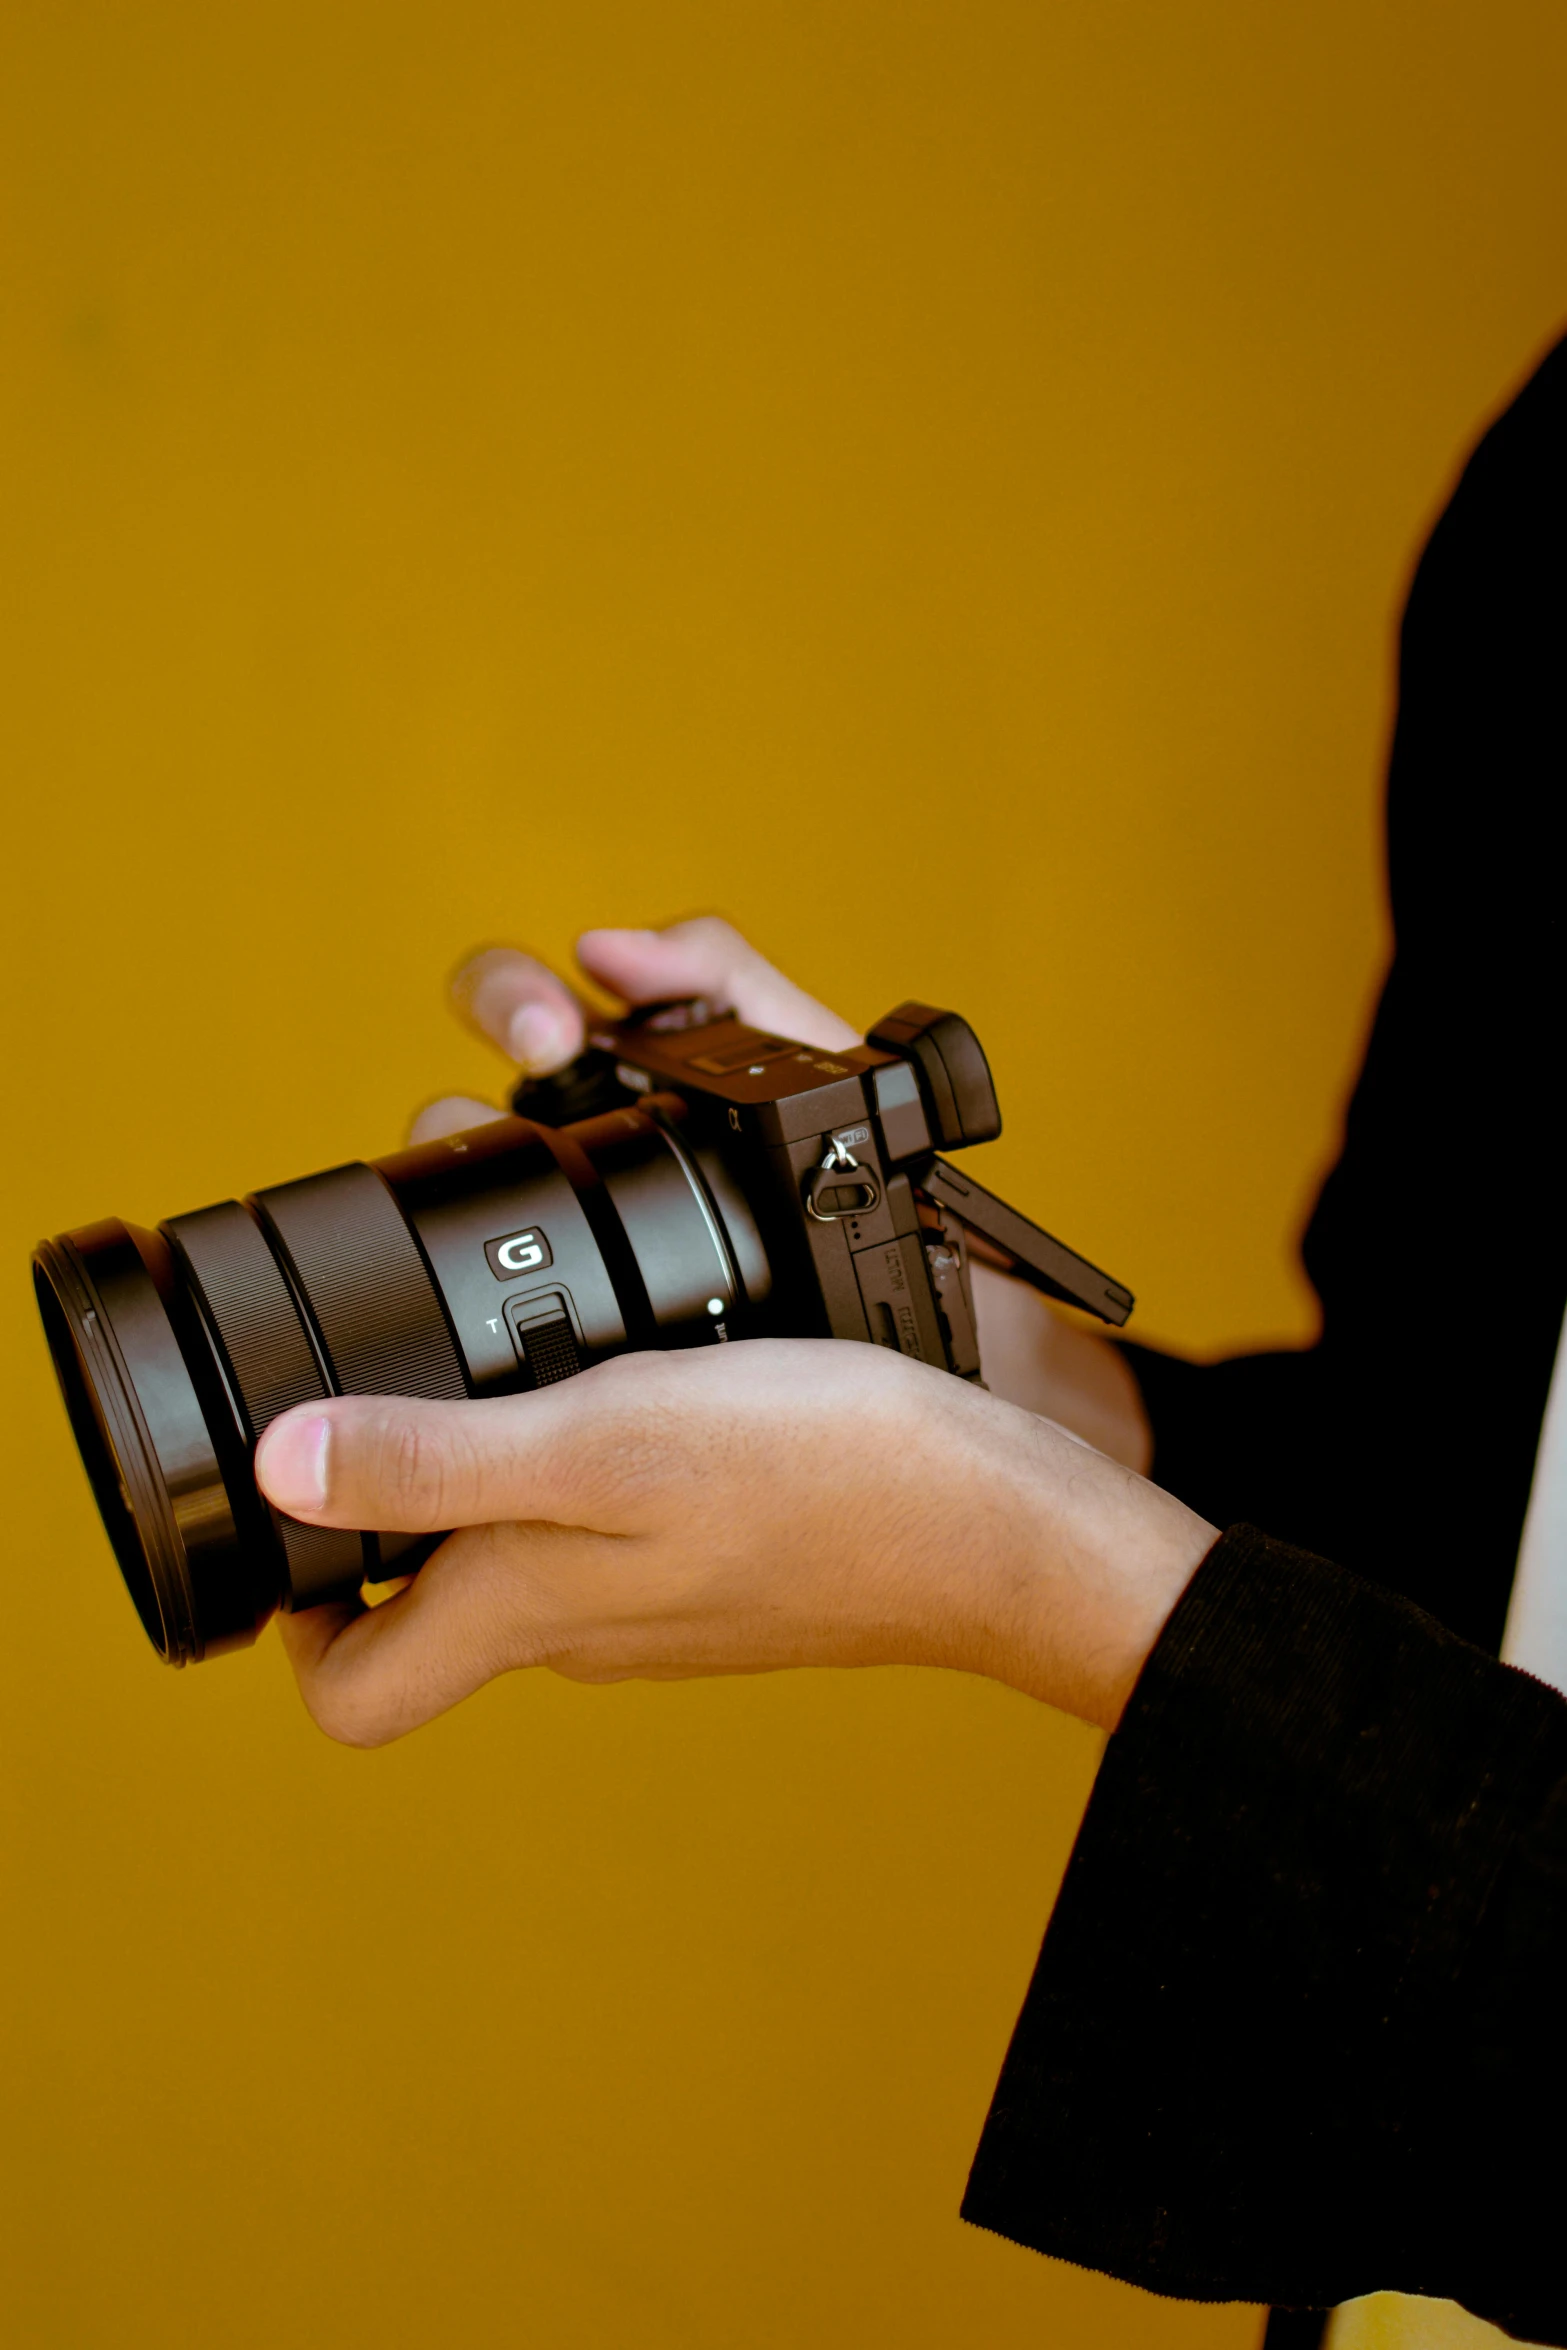 the hands holding a camera are shown close together